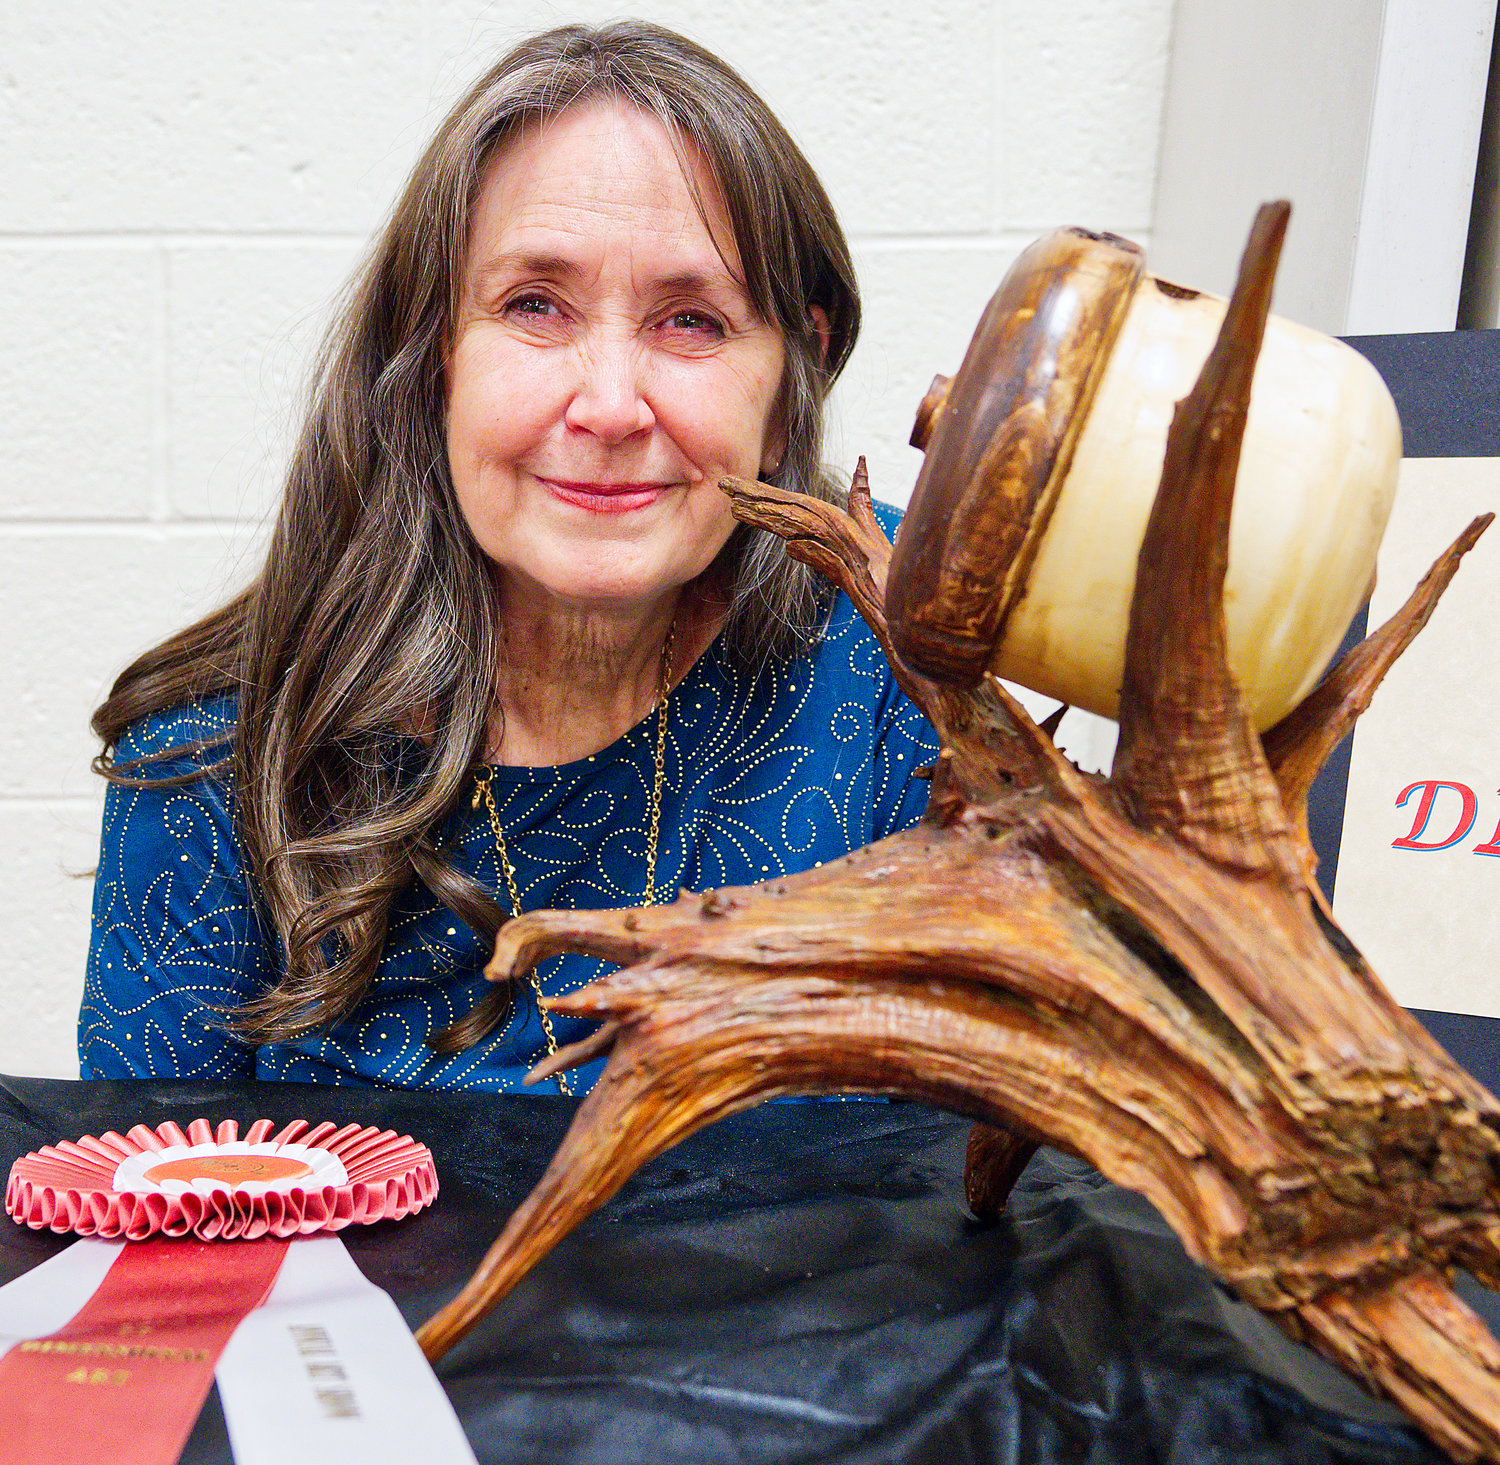 Trudy Haynes shows her brother’s award-wining sculpture displayed during last week’s Mineola League of the Arts annual art show.